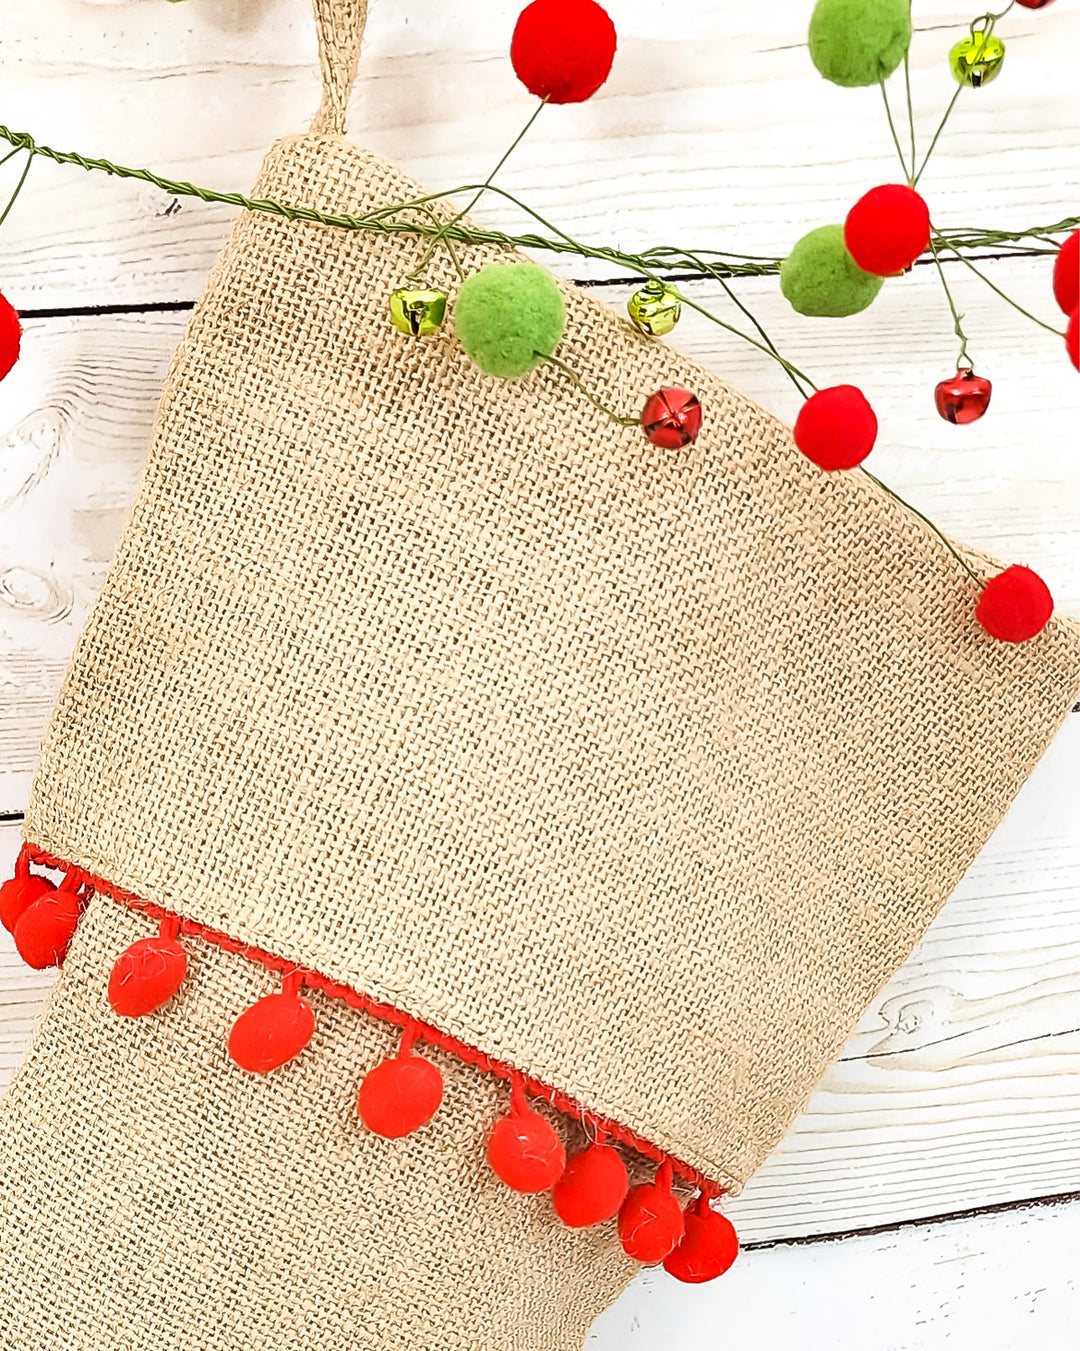 Burlap Personalized Christmas Stocking With Red Pom Poms